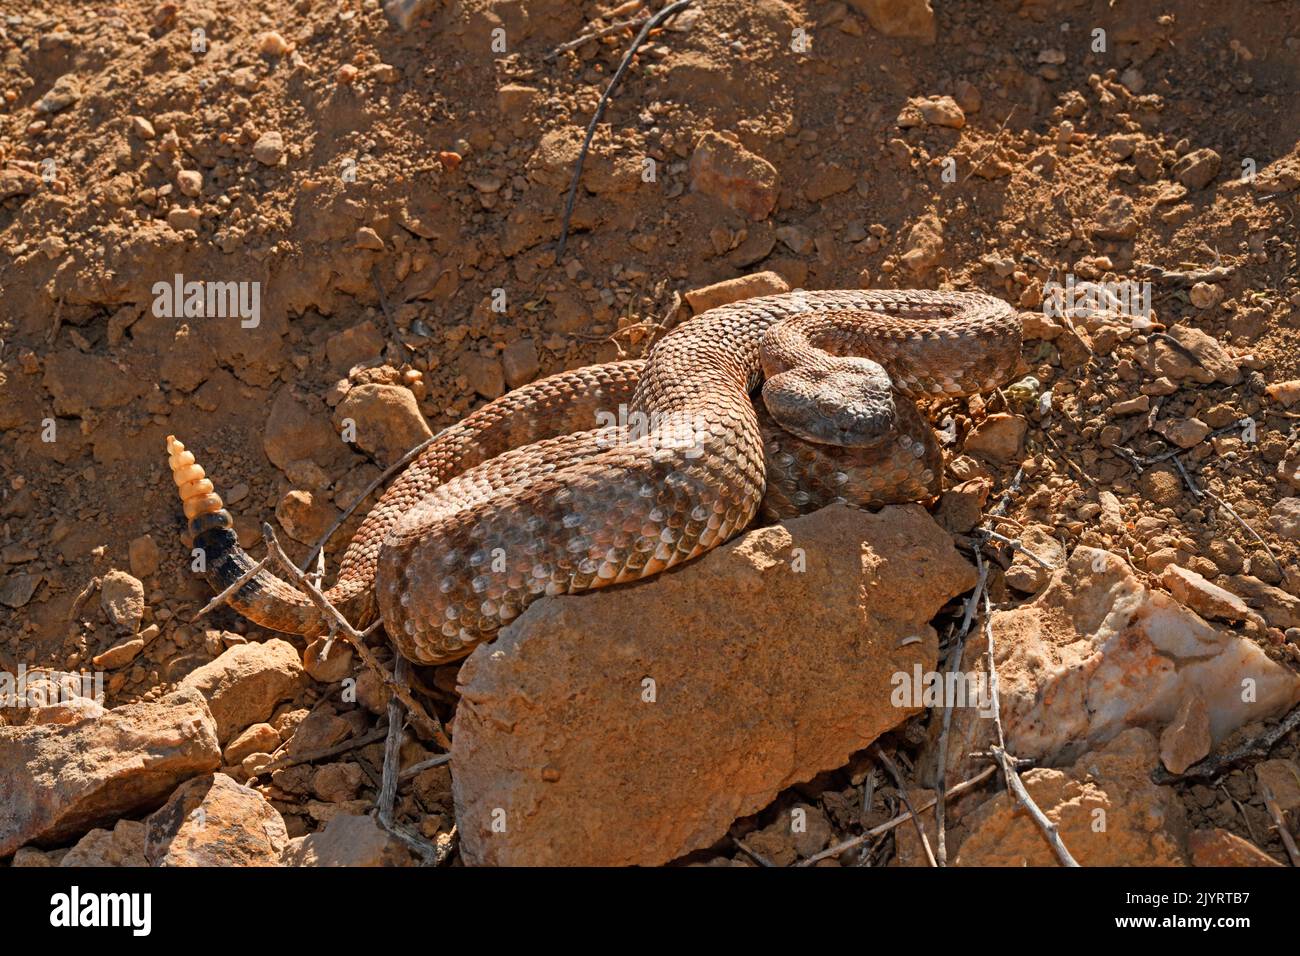 Panamint Rattlesnake (Crotalus stefensi), California Centrale-Orientale, S.W. Nevada. Foto Stock